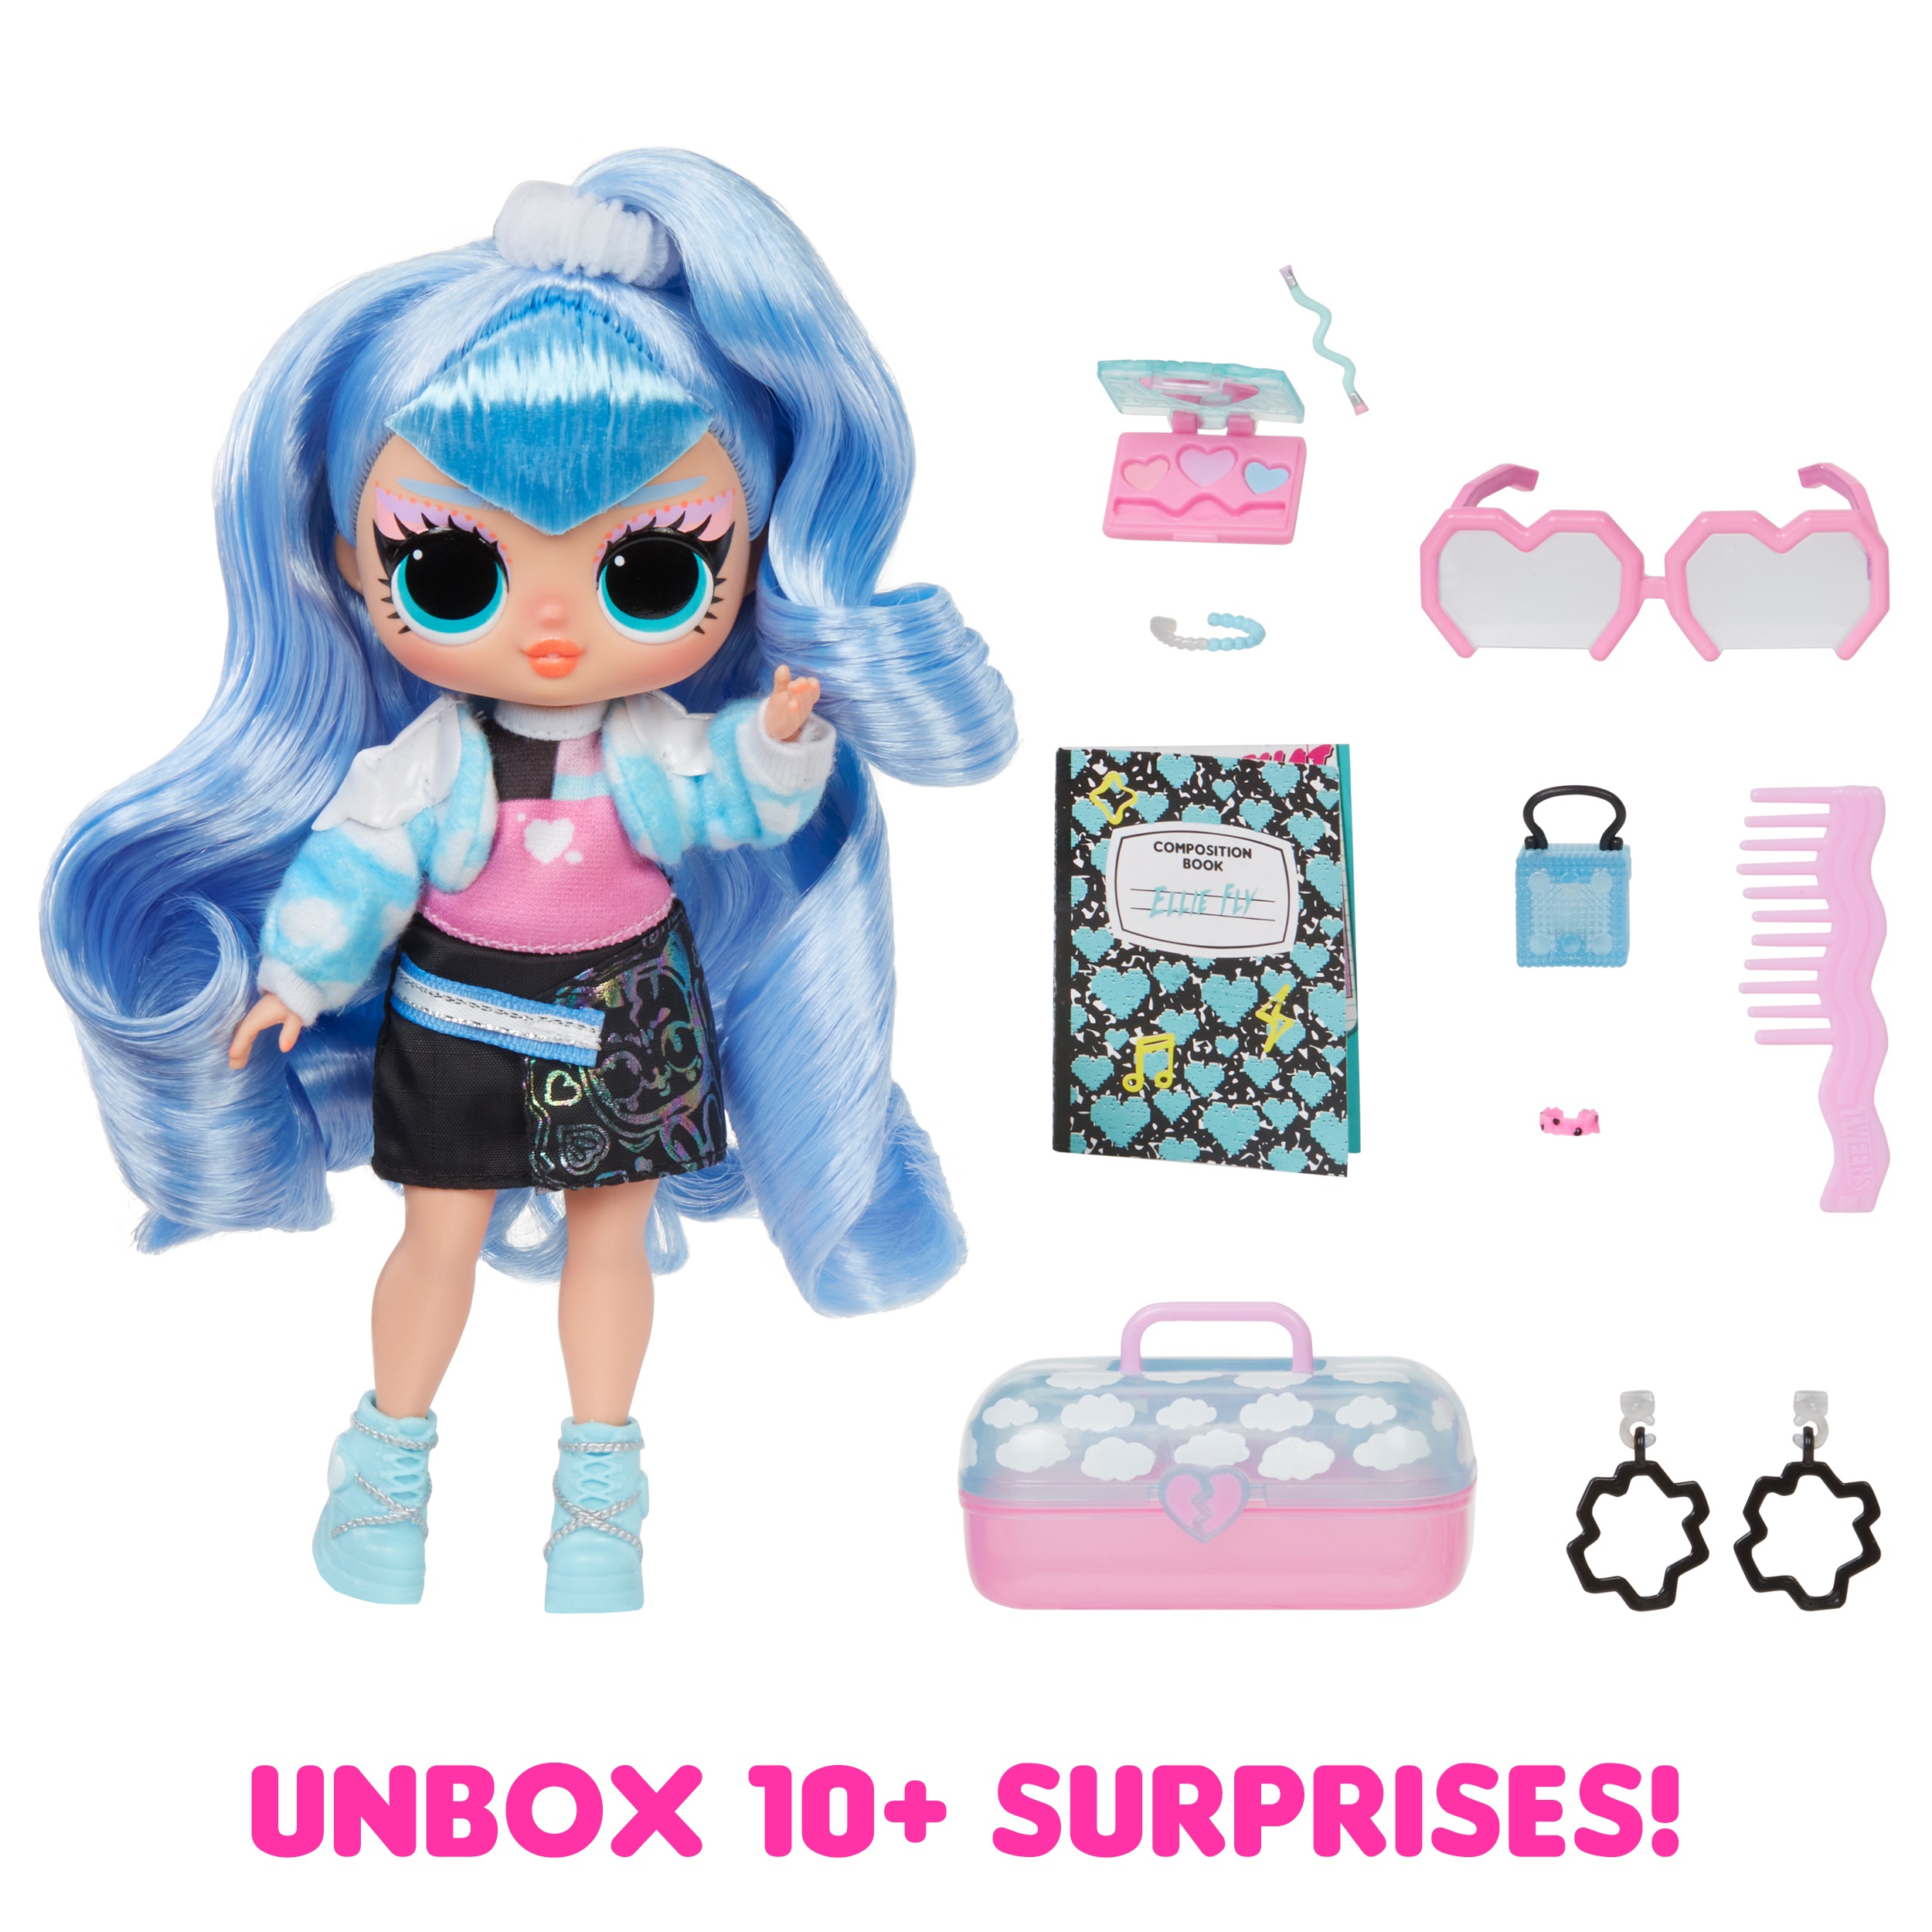 LOL Surprise Tweens Fashion Doll Ellie Fly with 10+ Surprises, Great Gift for Kids Ages 4+ - image 3 of 7